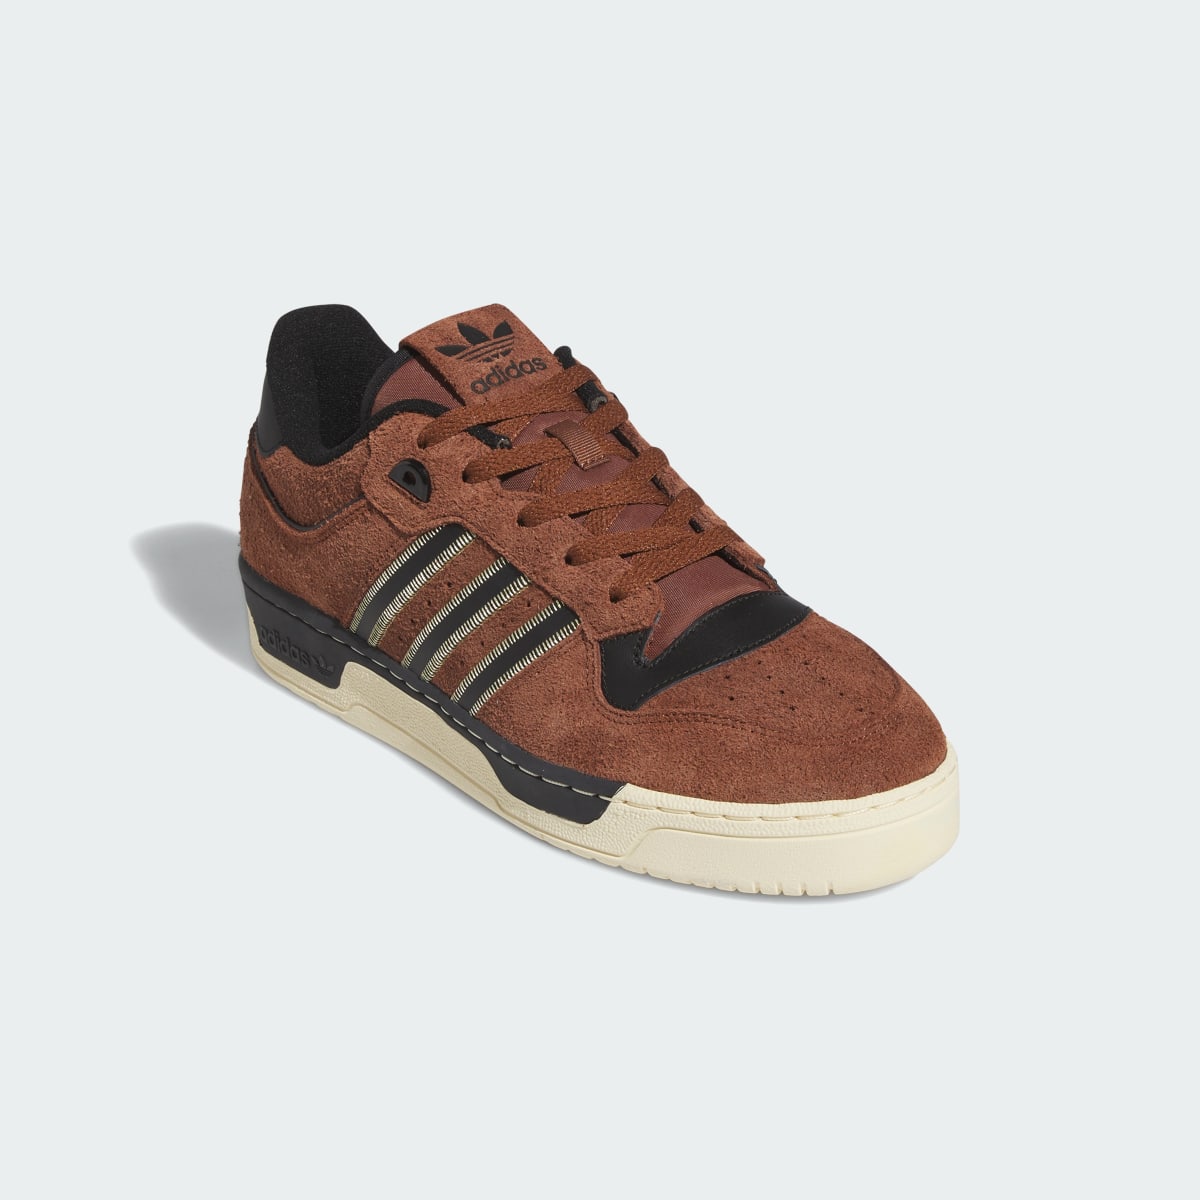 Adidas Rivalry 86 Low Schuh. 5